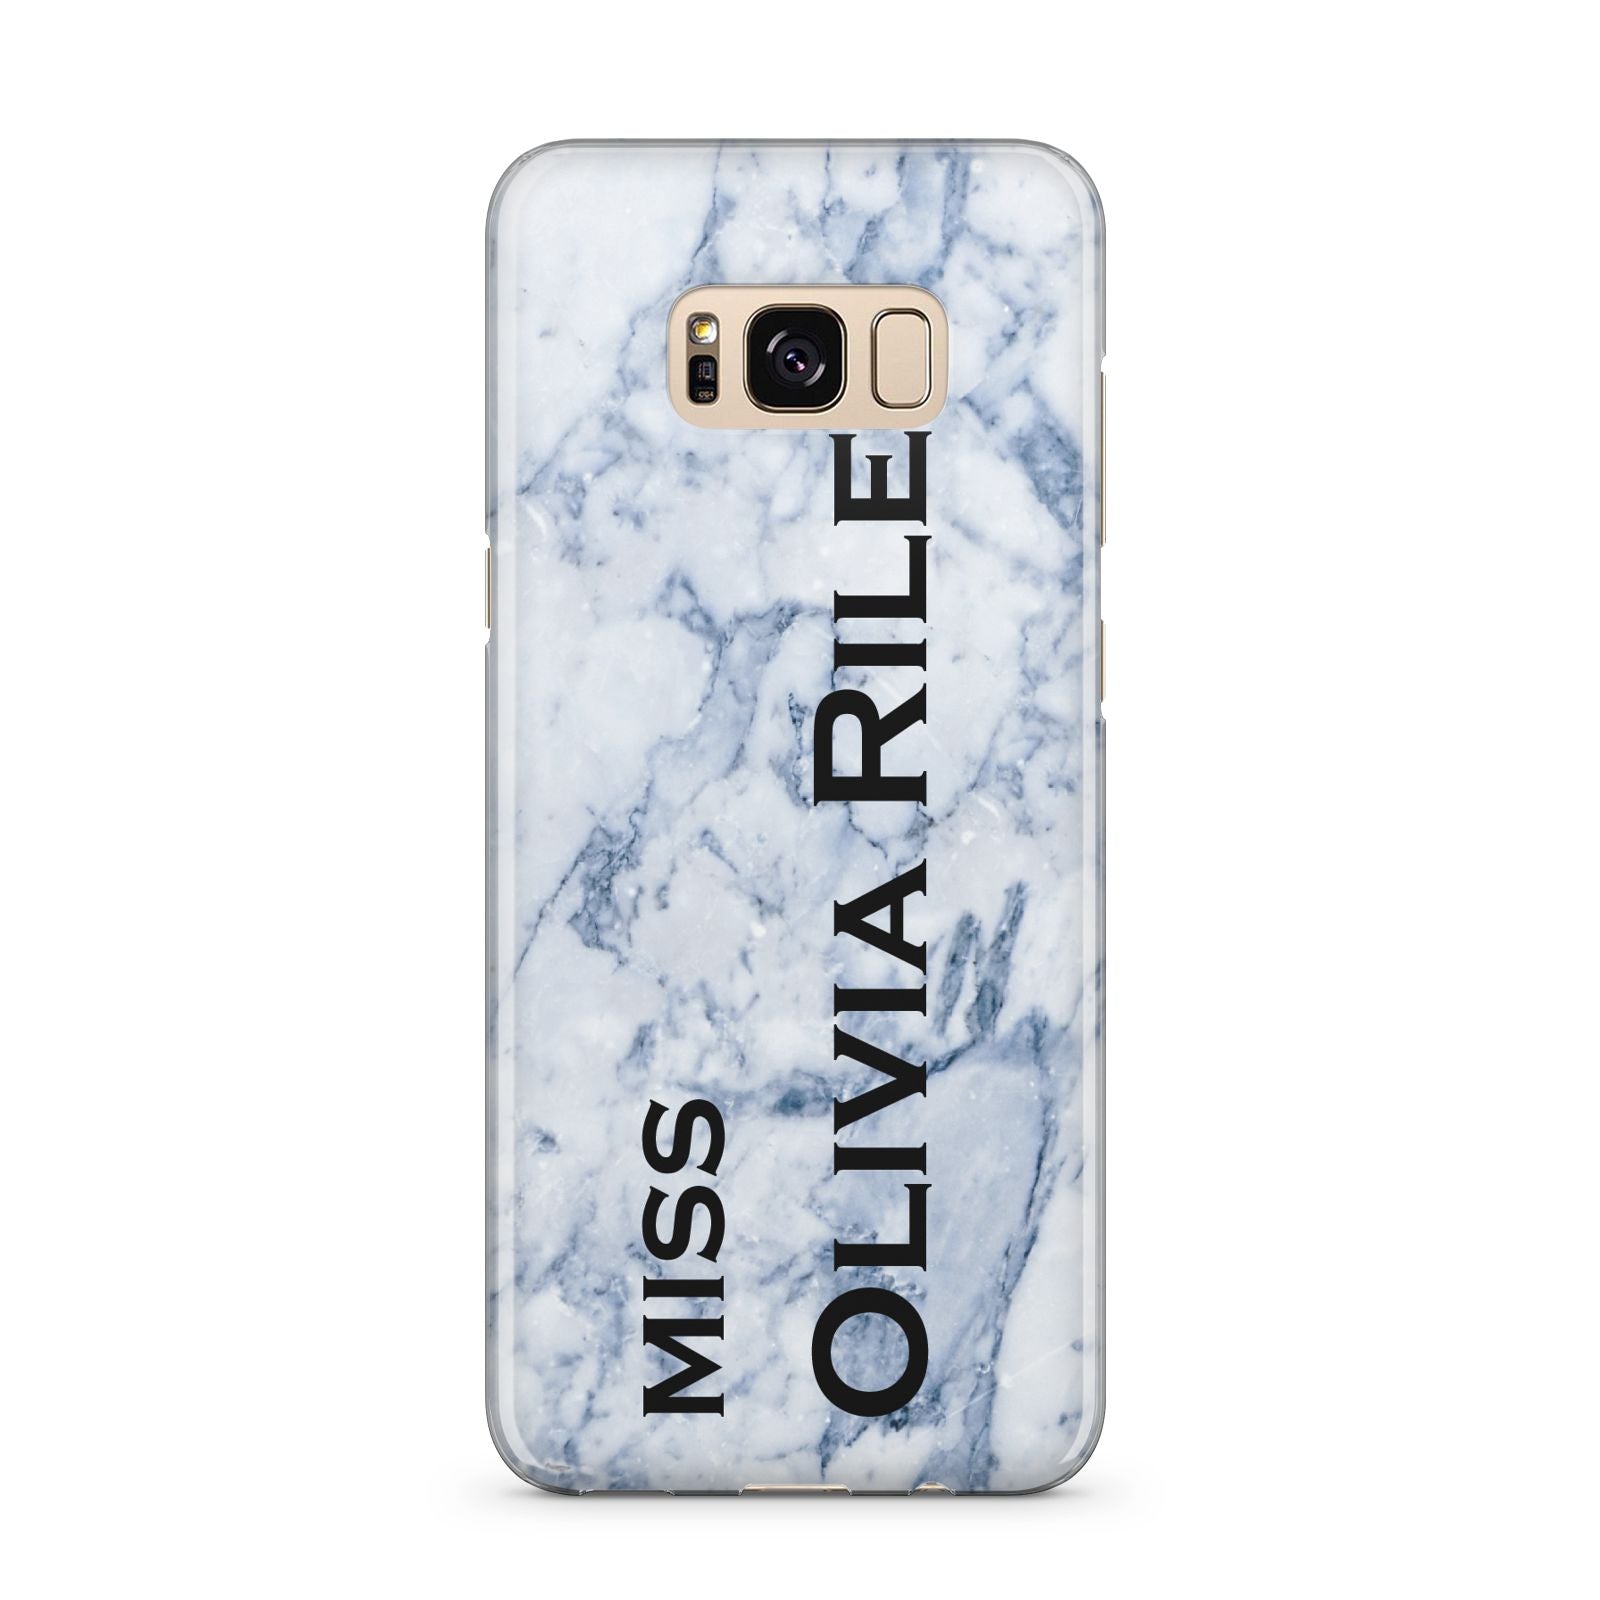 Full Name Grey Marble Samsung Galaxy S8 Plus Case